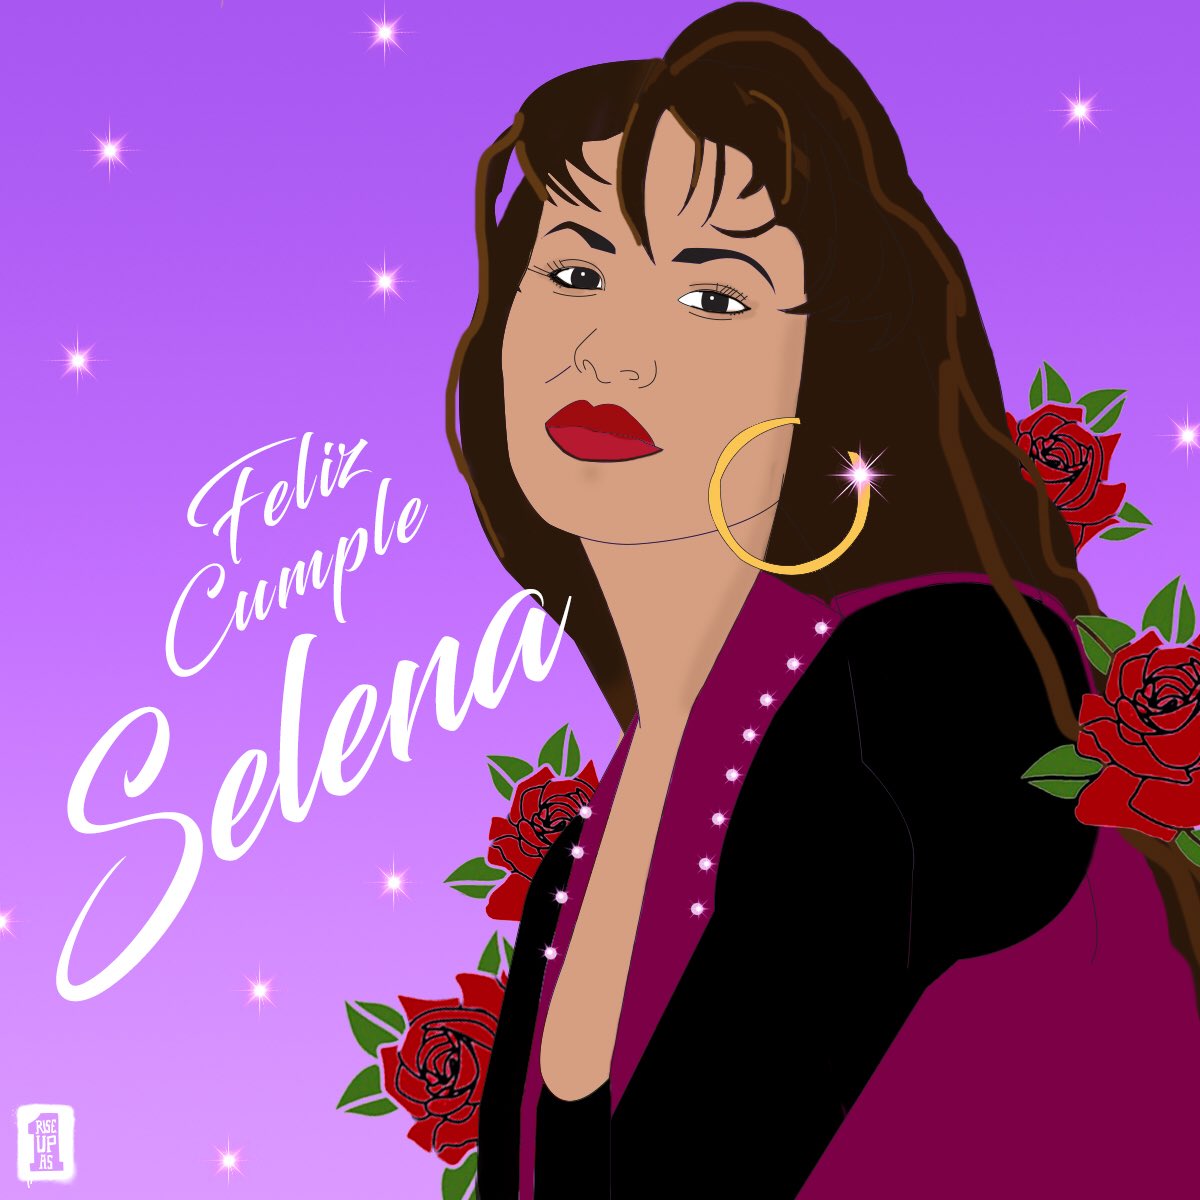 California Endowment auf Twitter: „Felicidades to “La Reina”👸🏽 #Selena  Quintanilla! The Tejano superstar continues to inspire us with her  beautiful music and the memory of her love for her family and community. #